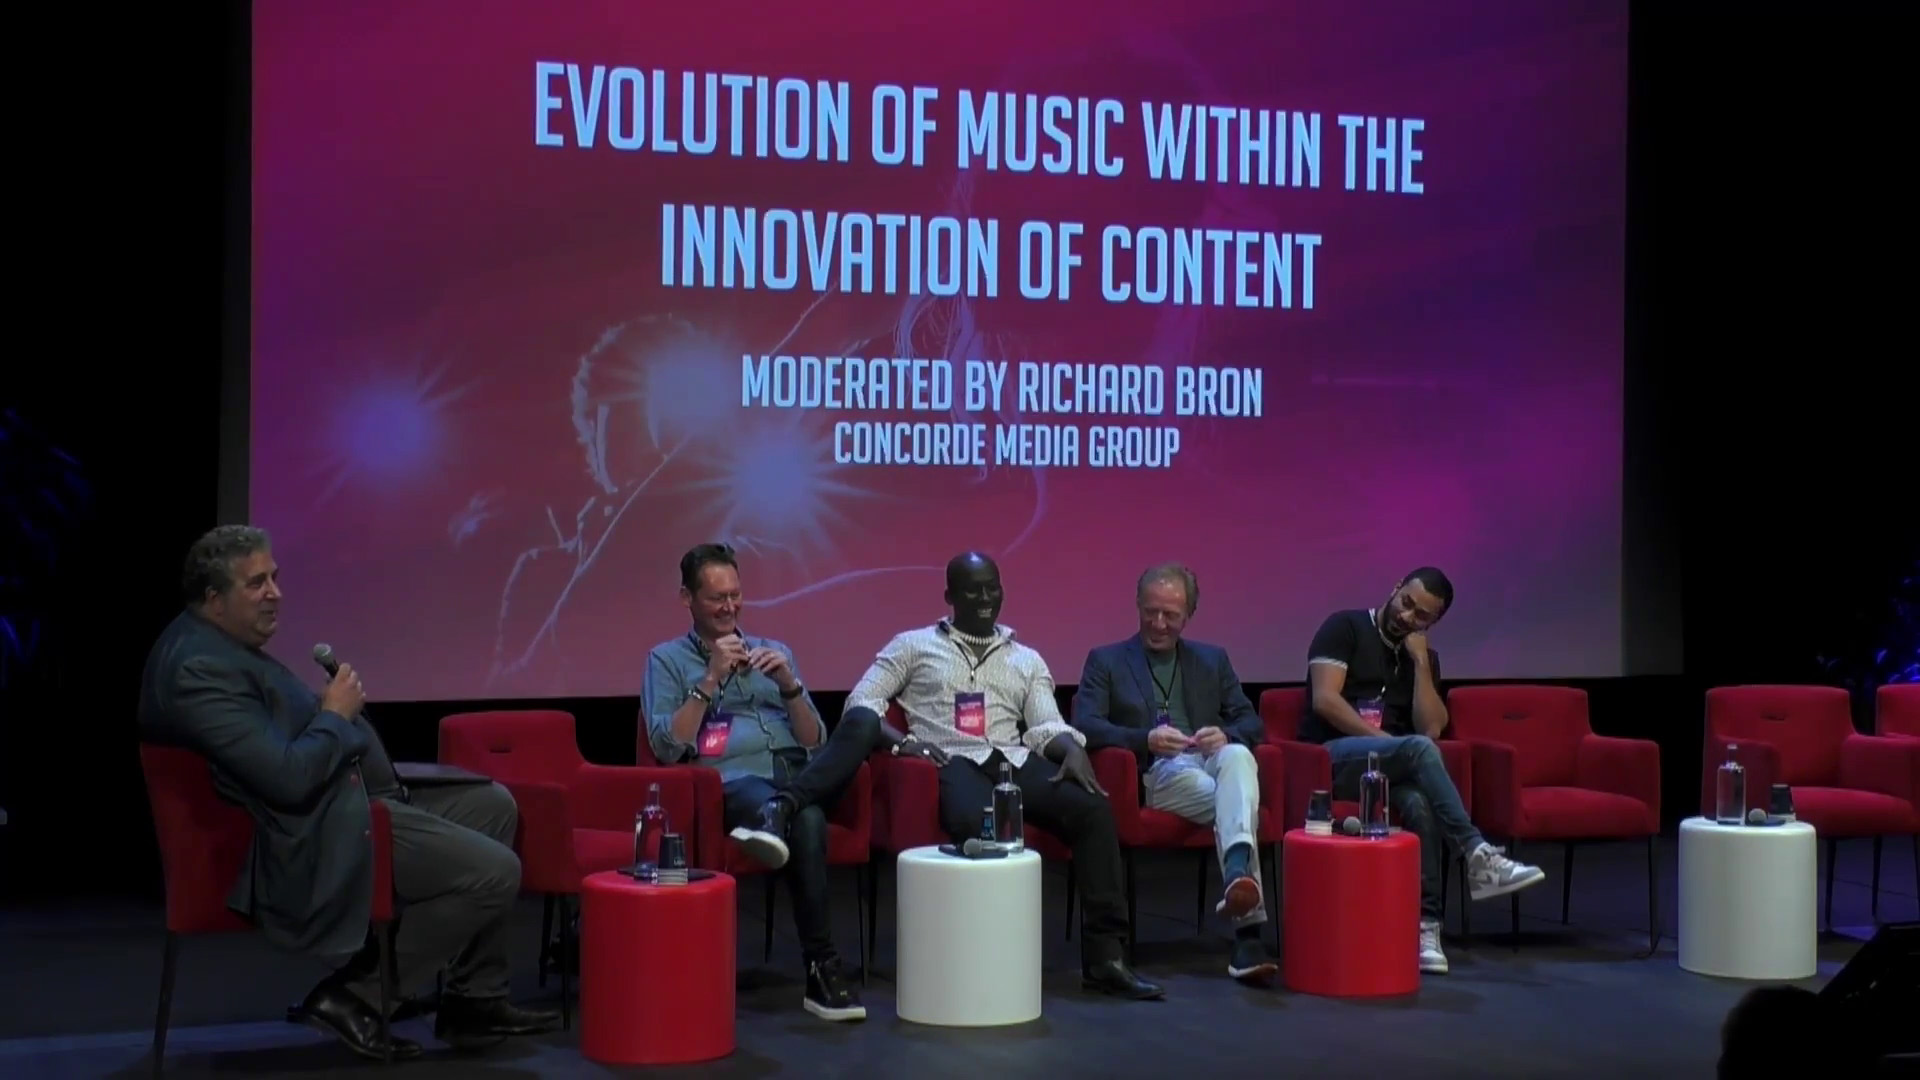 Evolution of music within the innovation of content